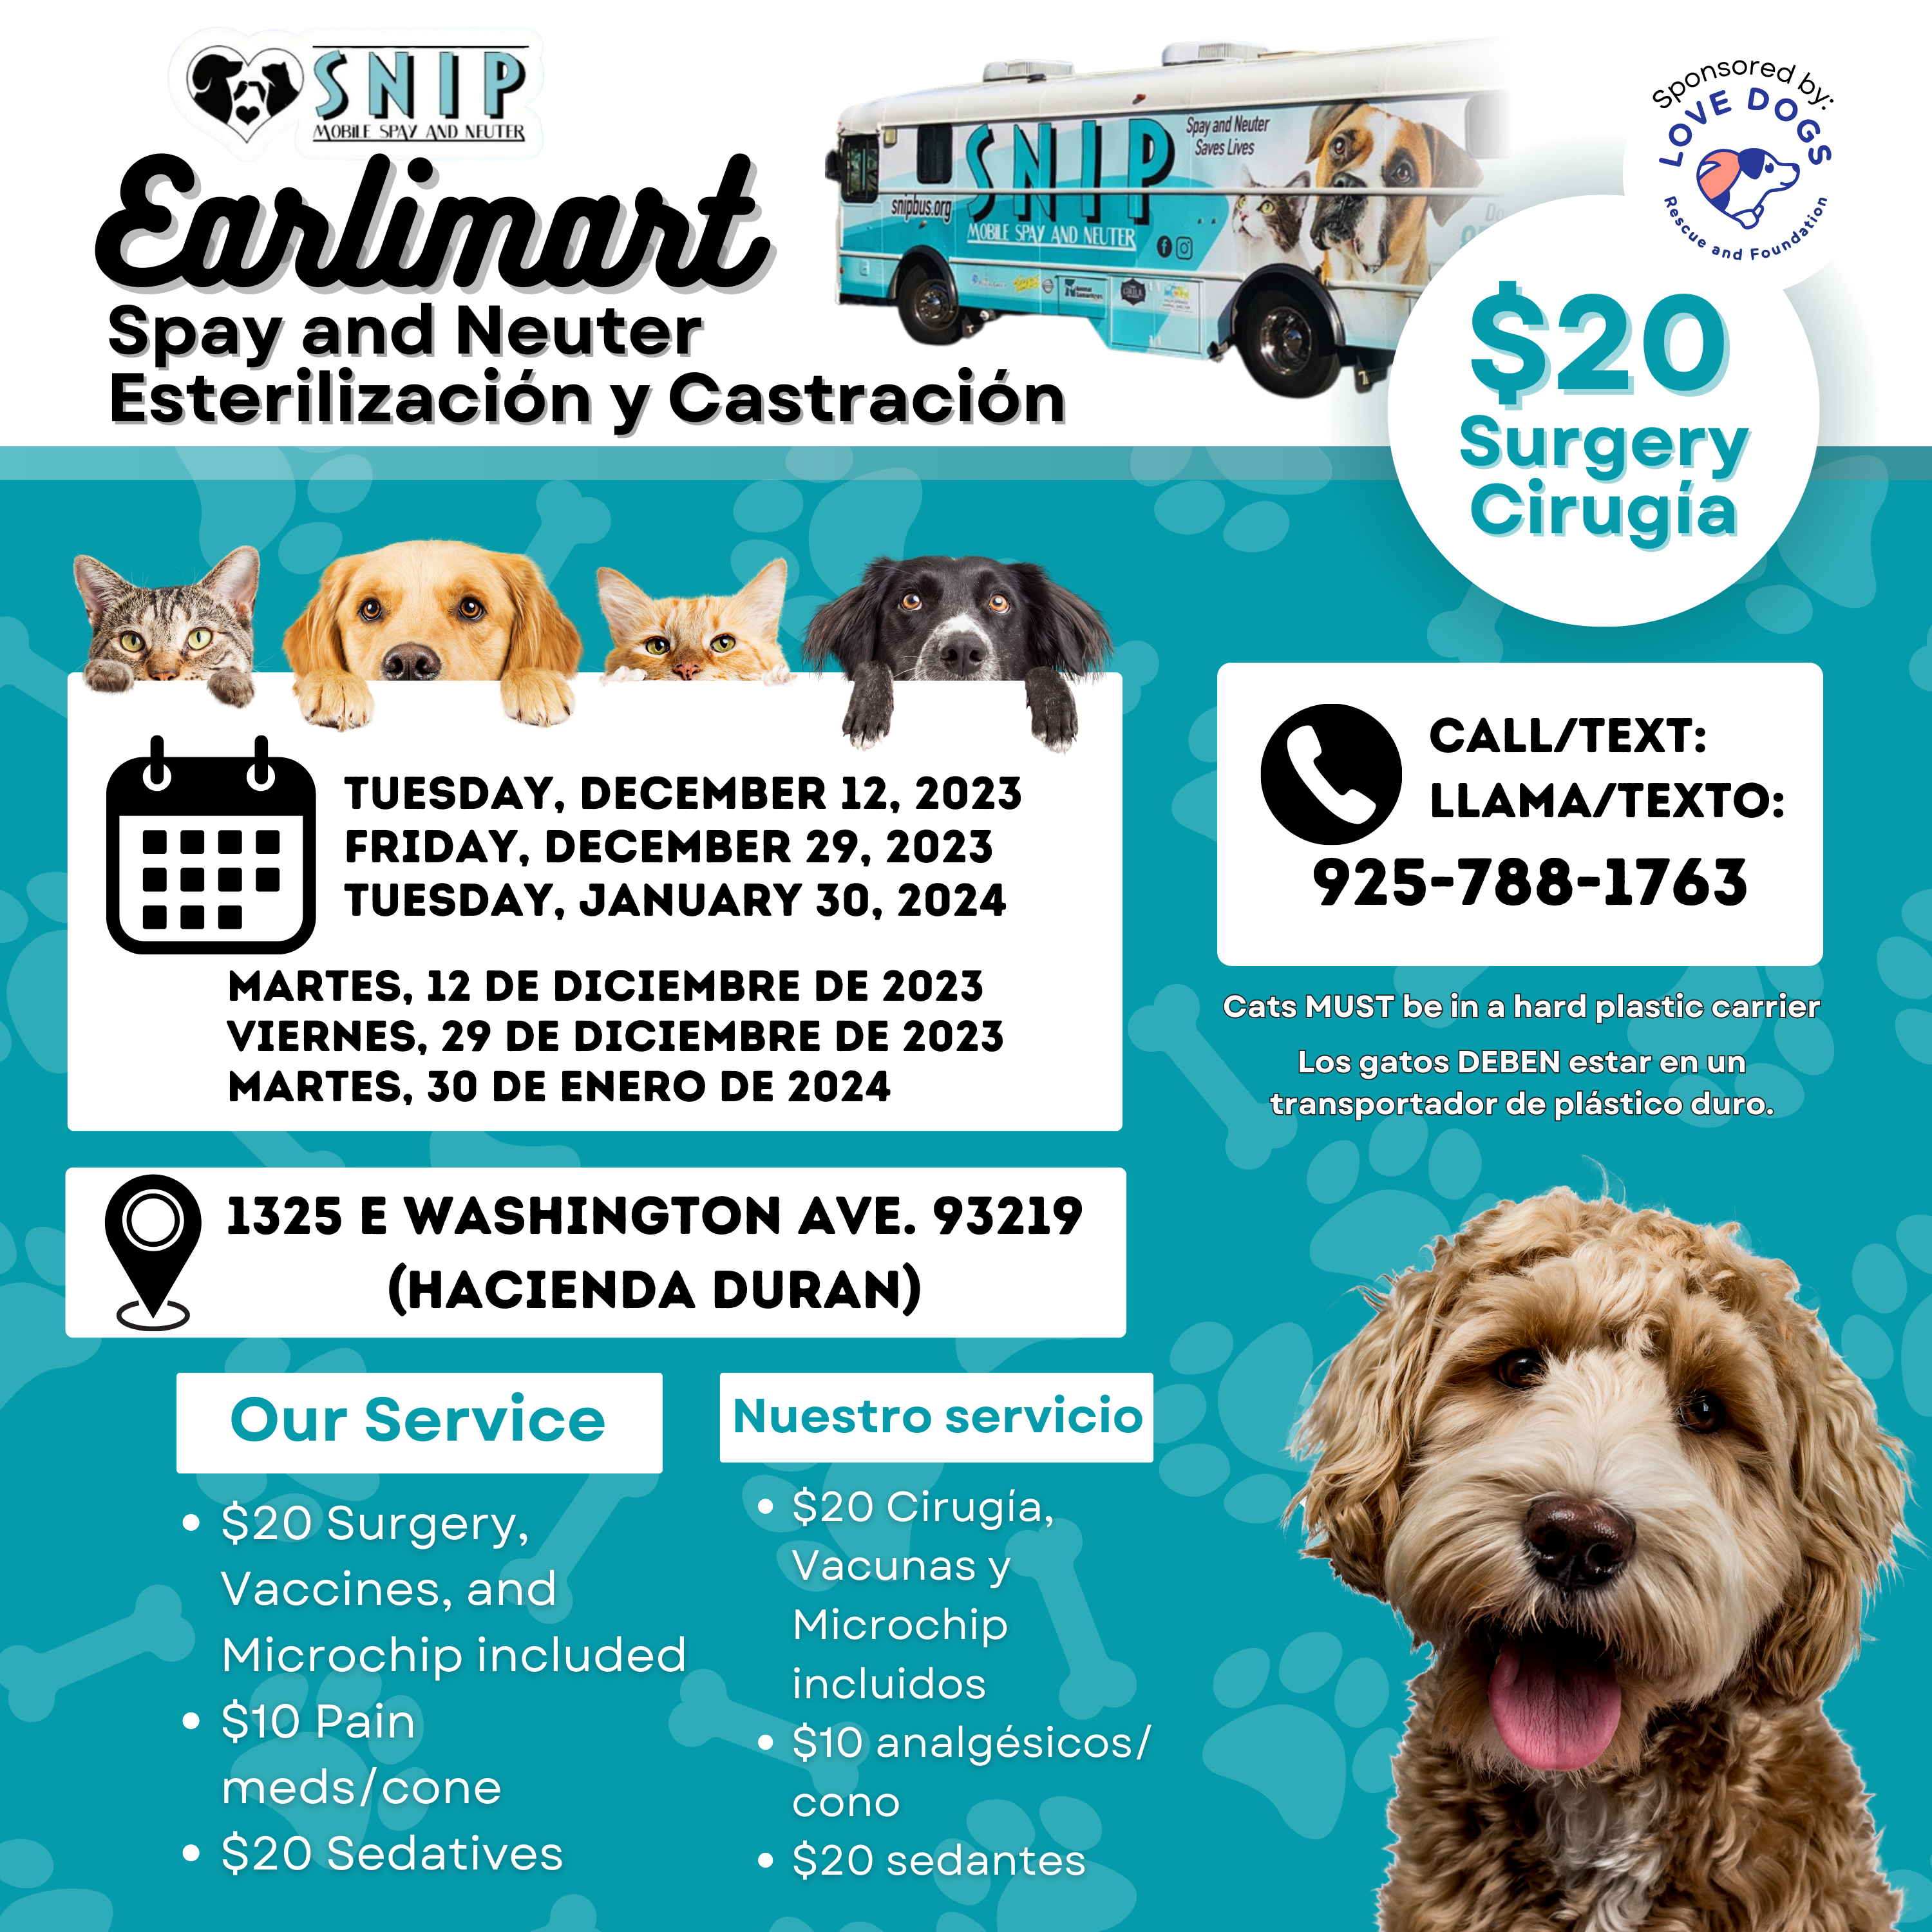 SNIP logo, SNIP bus (mobile spay & Neuter), LOVE DOGS logo, cats and dogs, information in acticle